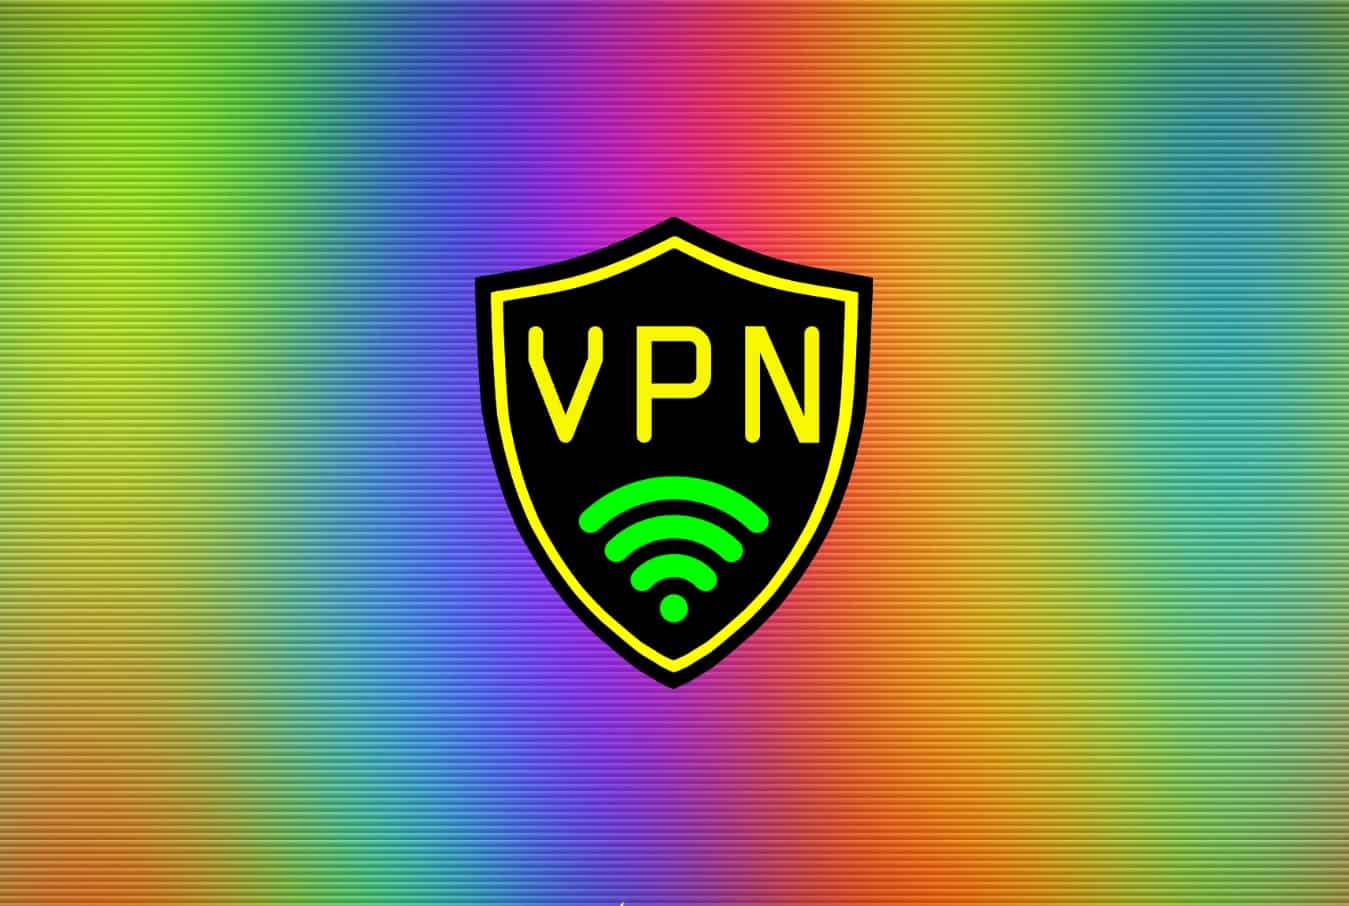 134 million downloads in 85 countries: A look at VPN usage in 2020